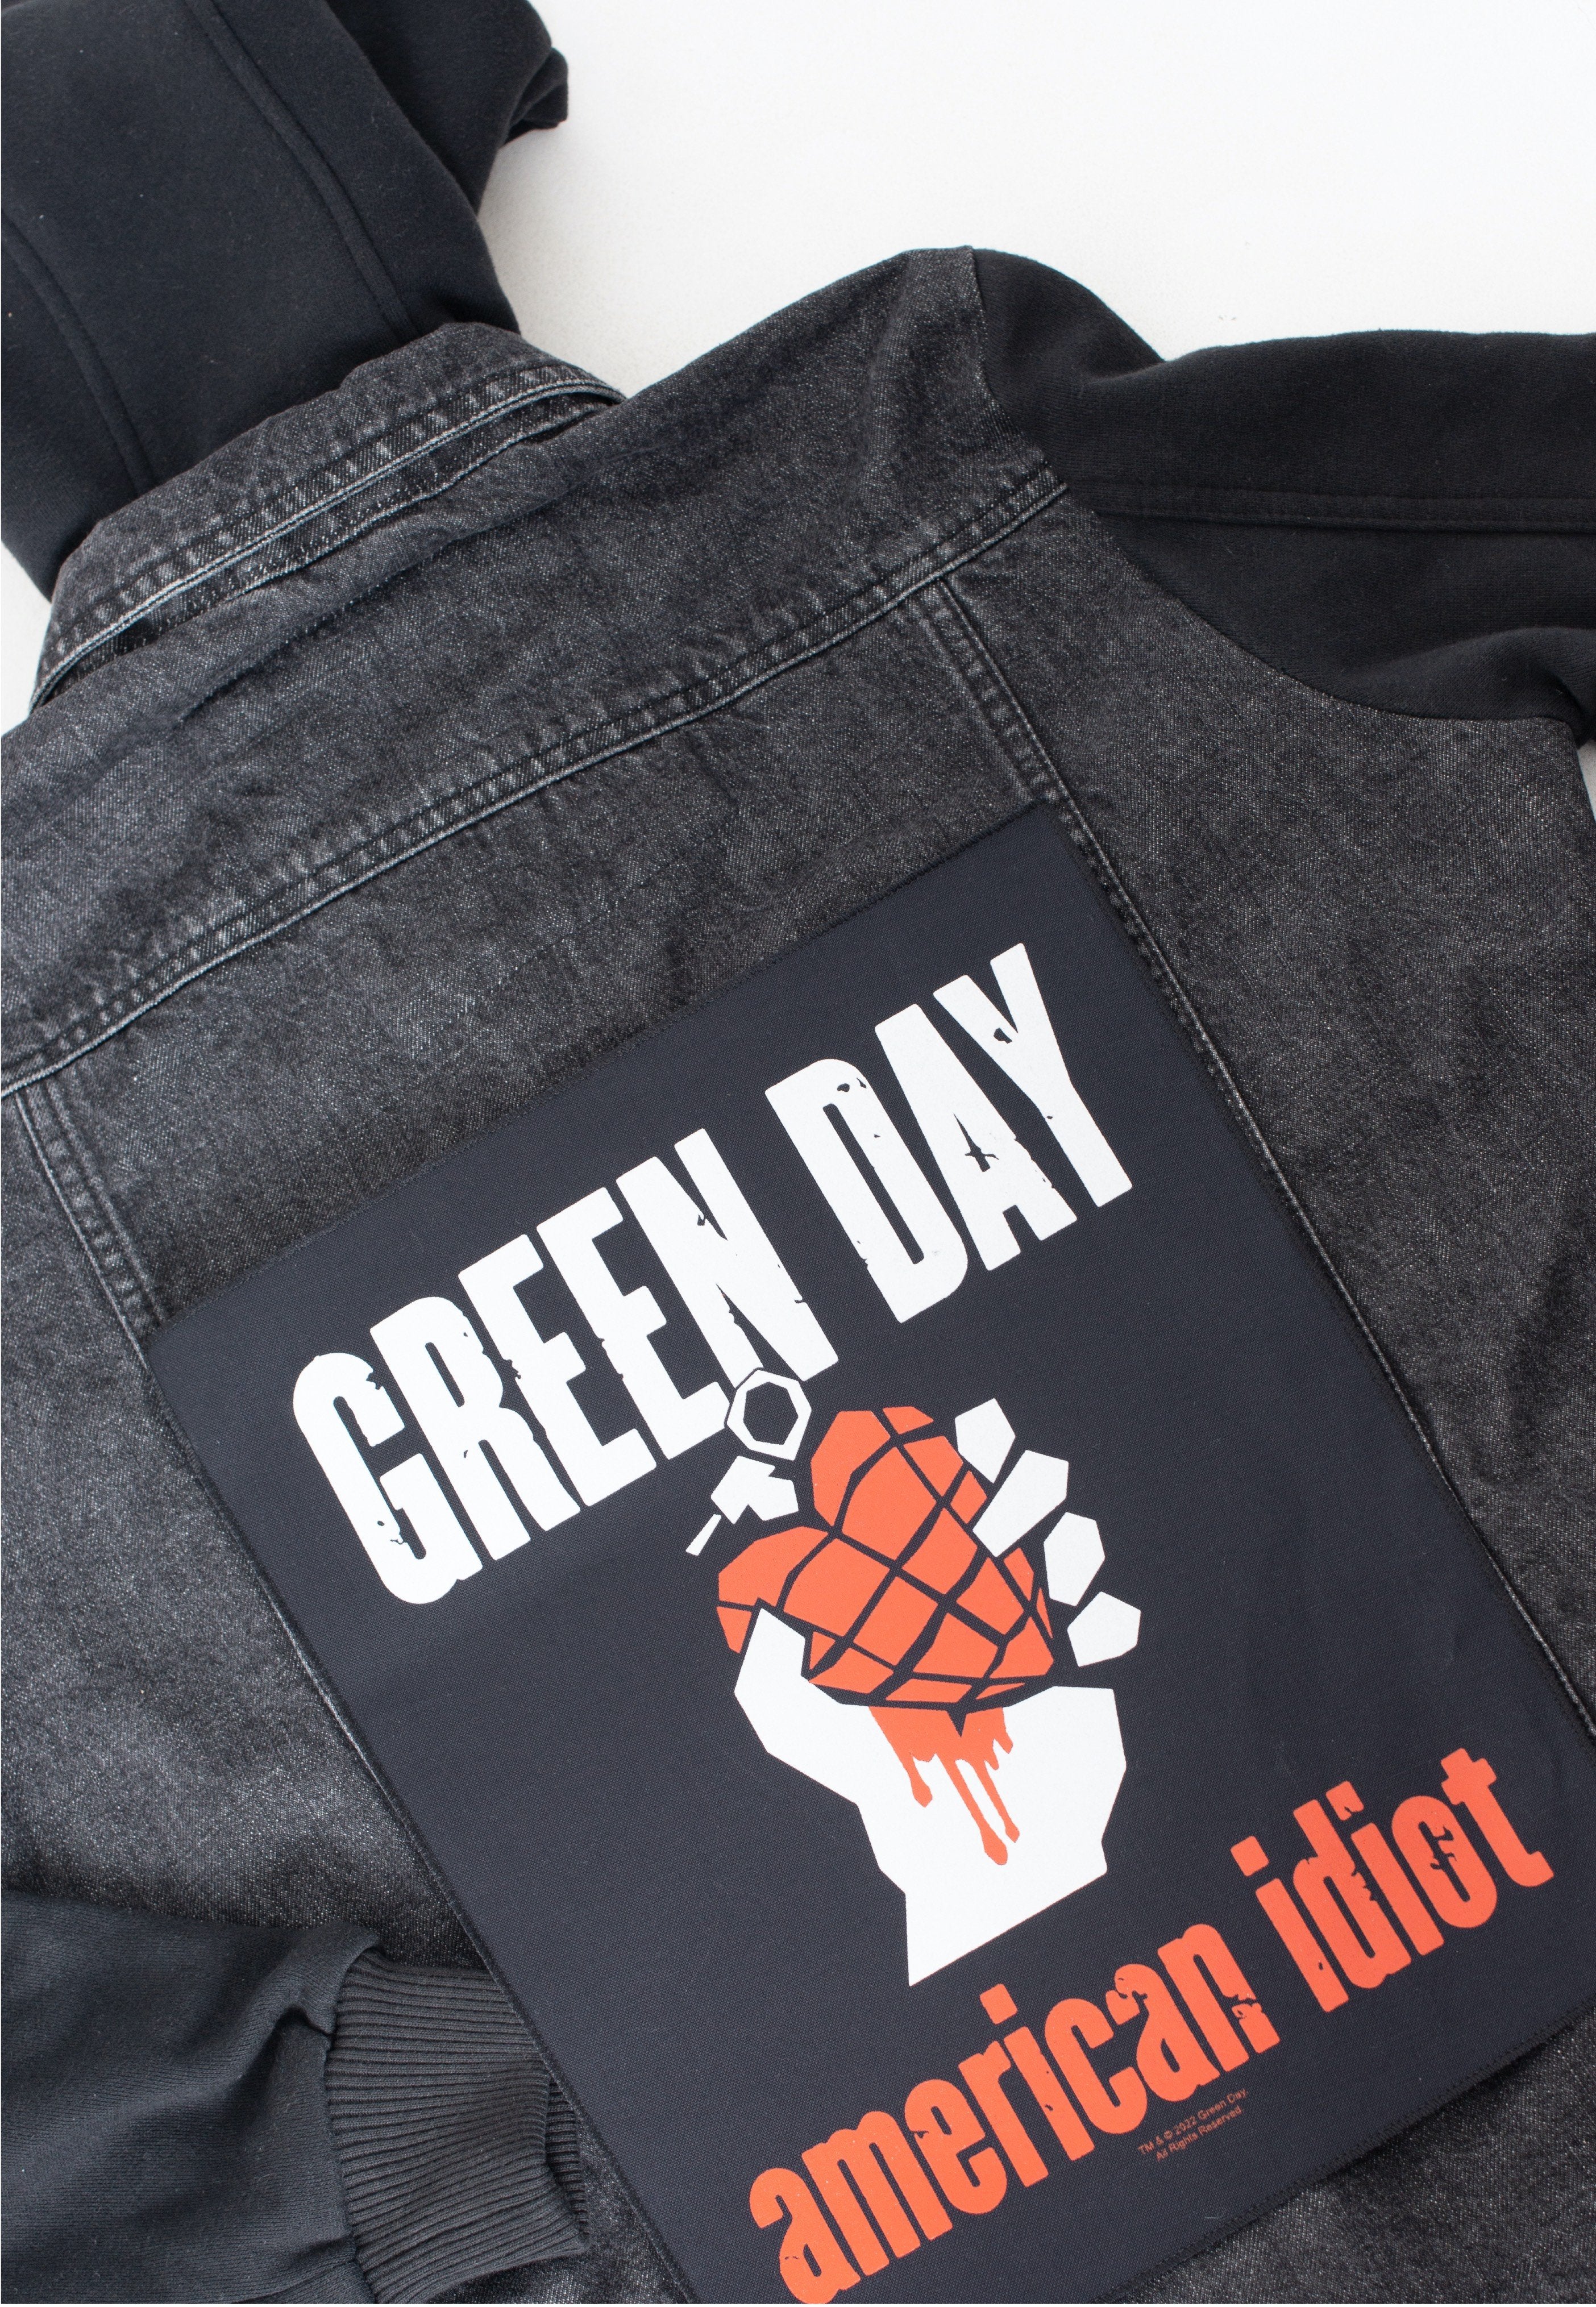 Green Day - American Idiot - Backpatch